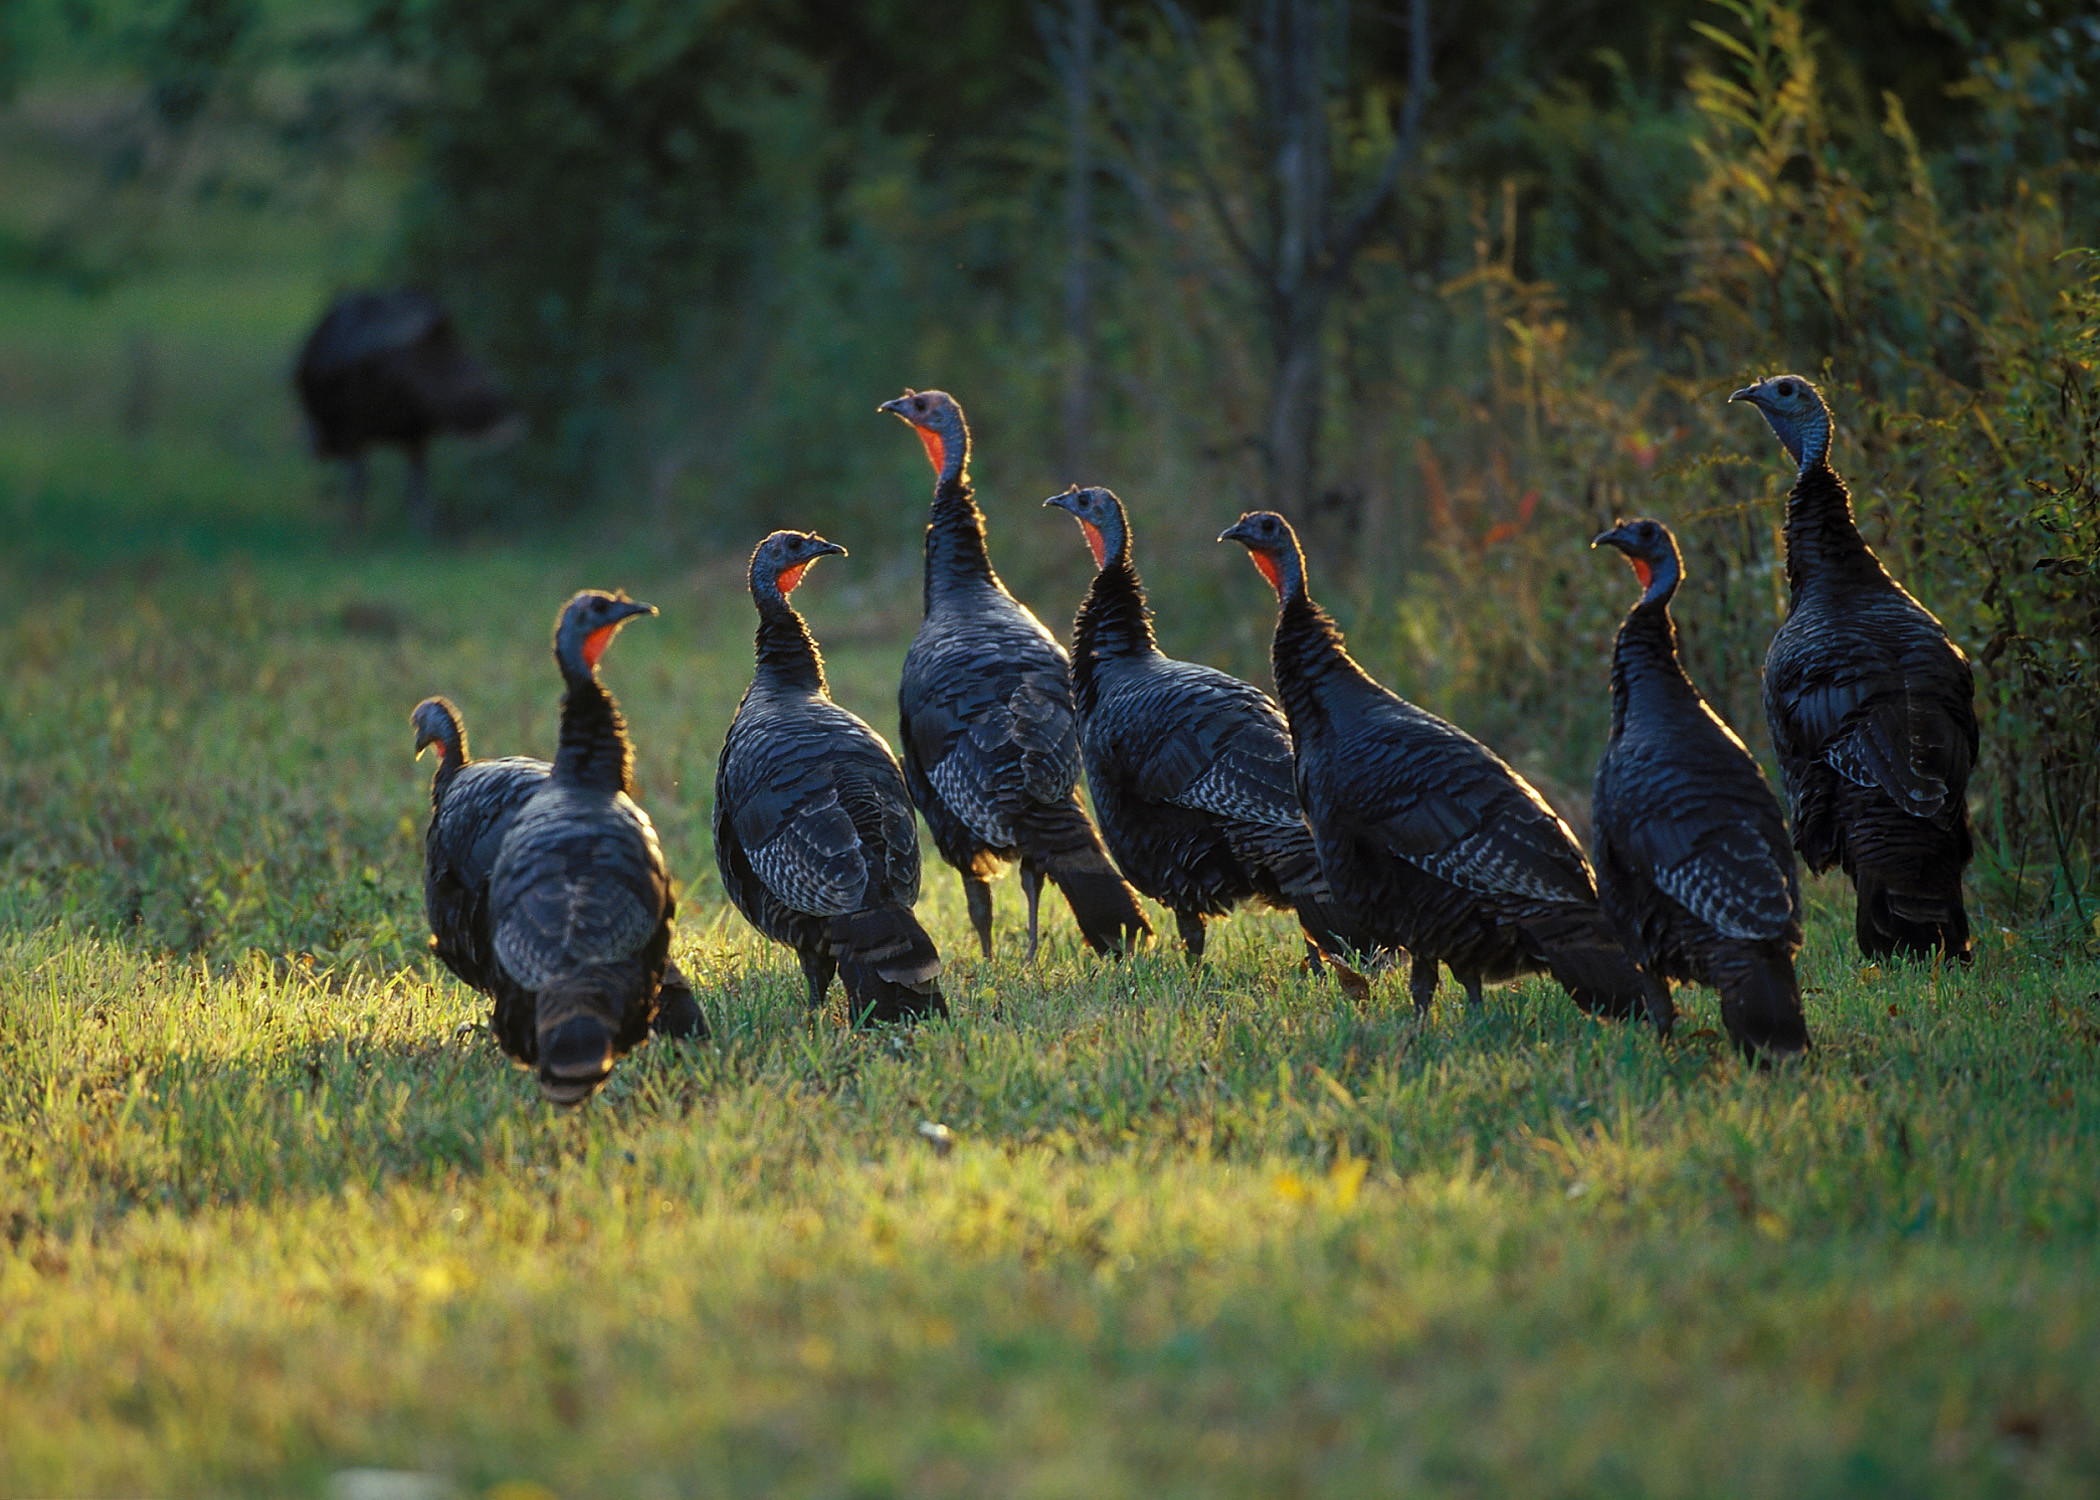 2100x1500 The National Wild Turkey Federation was founded in 1973 with its 